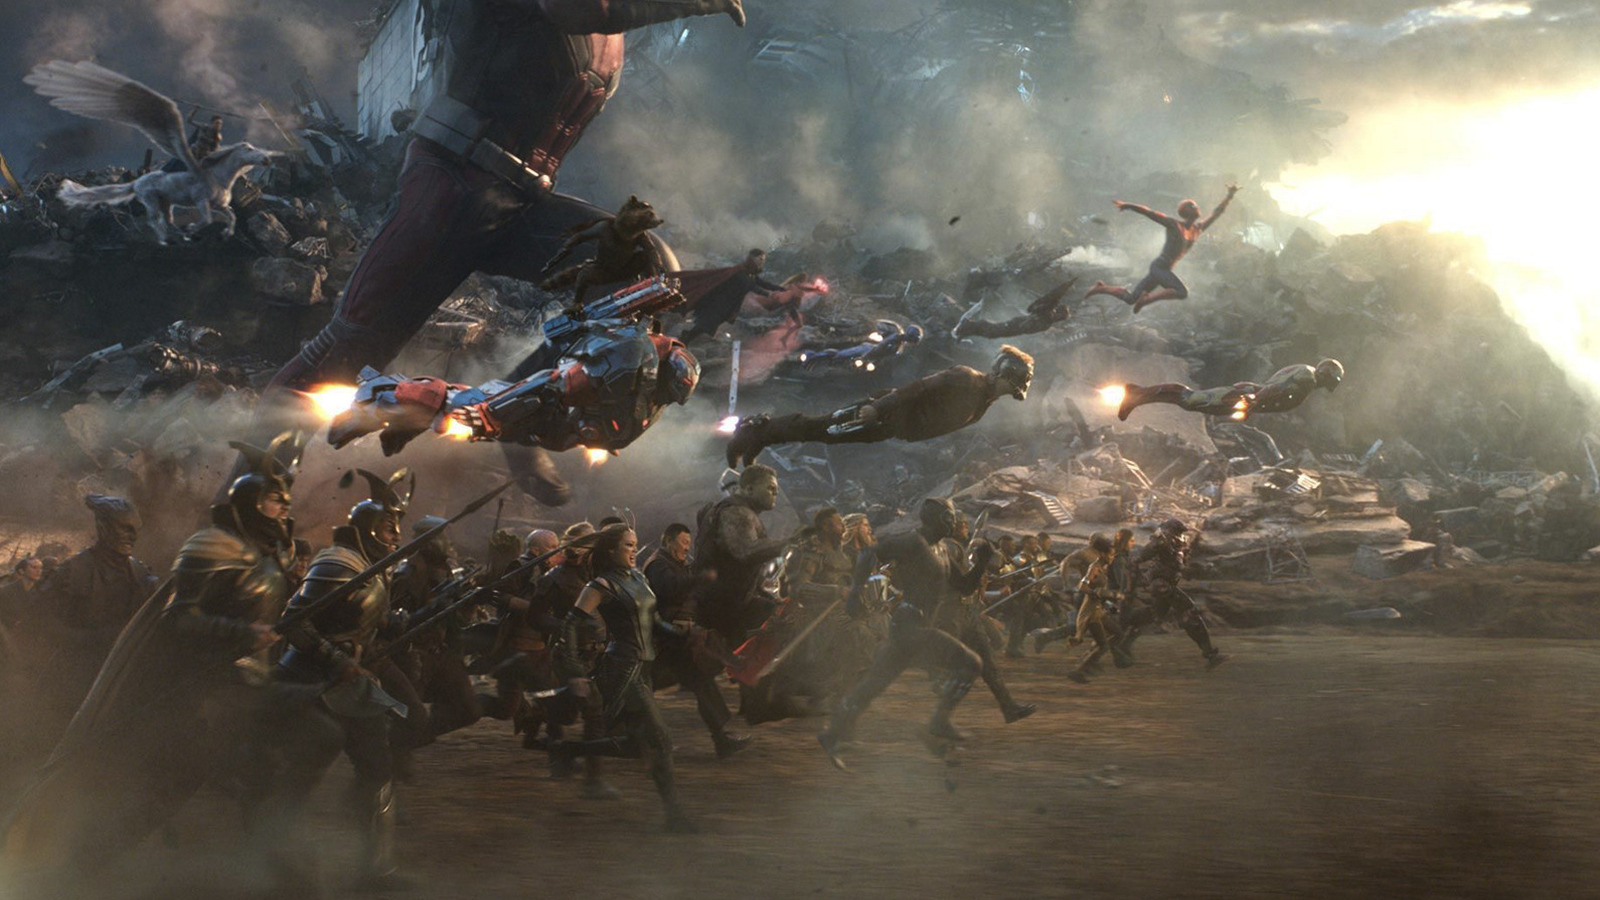 How Avengers: Endgame's Final Battle Changed In Reshoots